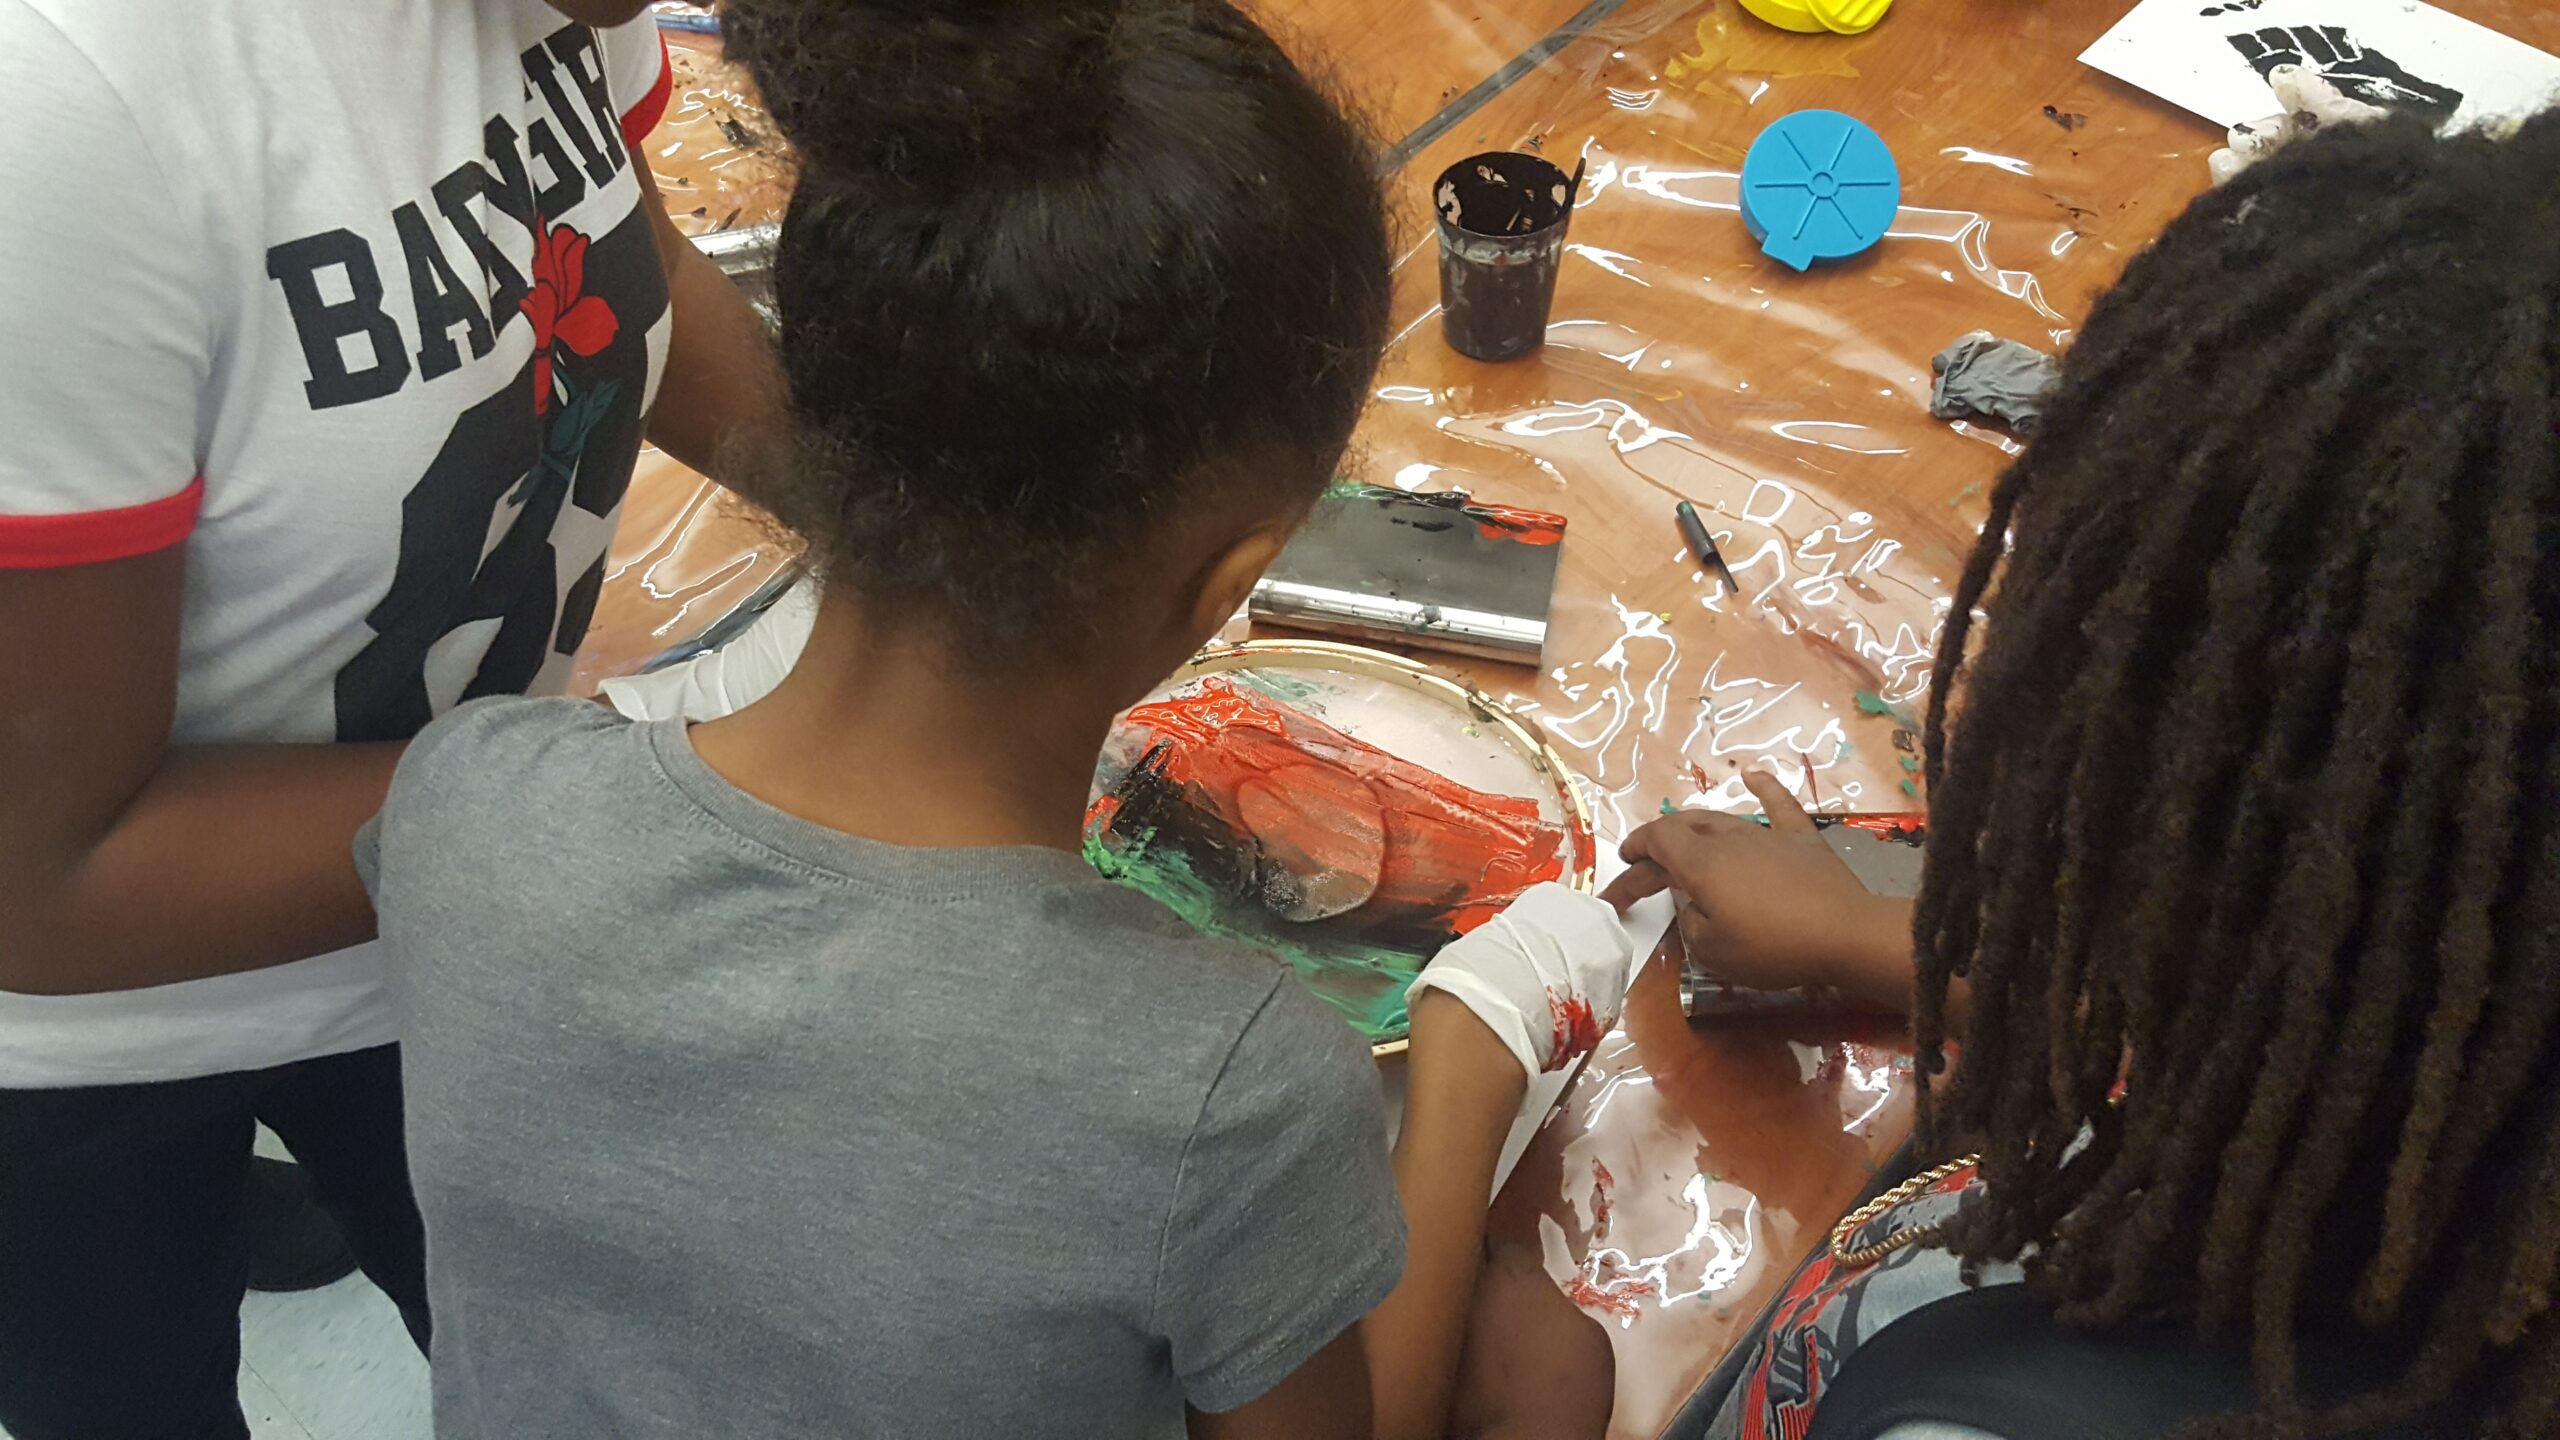 3 Black students at Grass Valley Elementary School in Oakland, CA participate in screenprinting together.